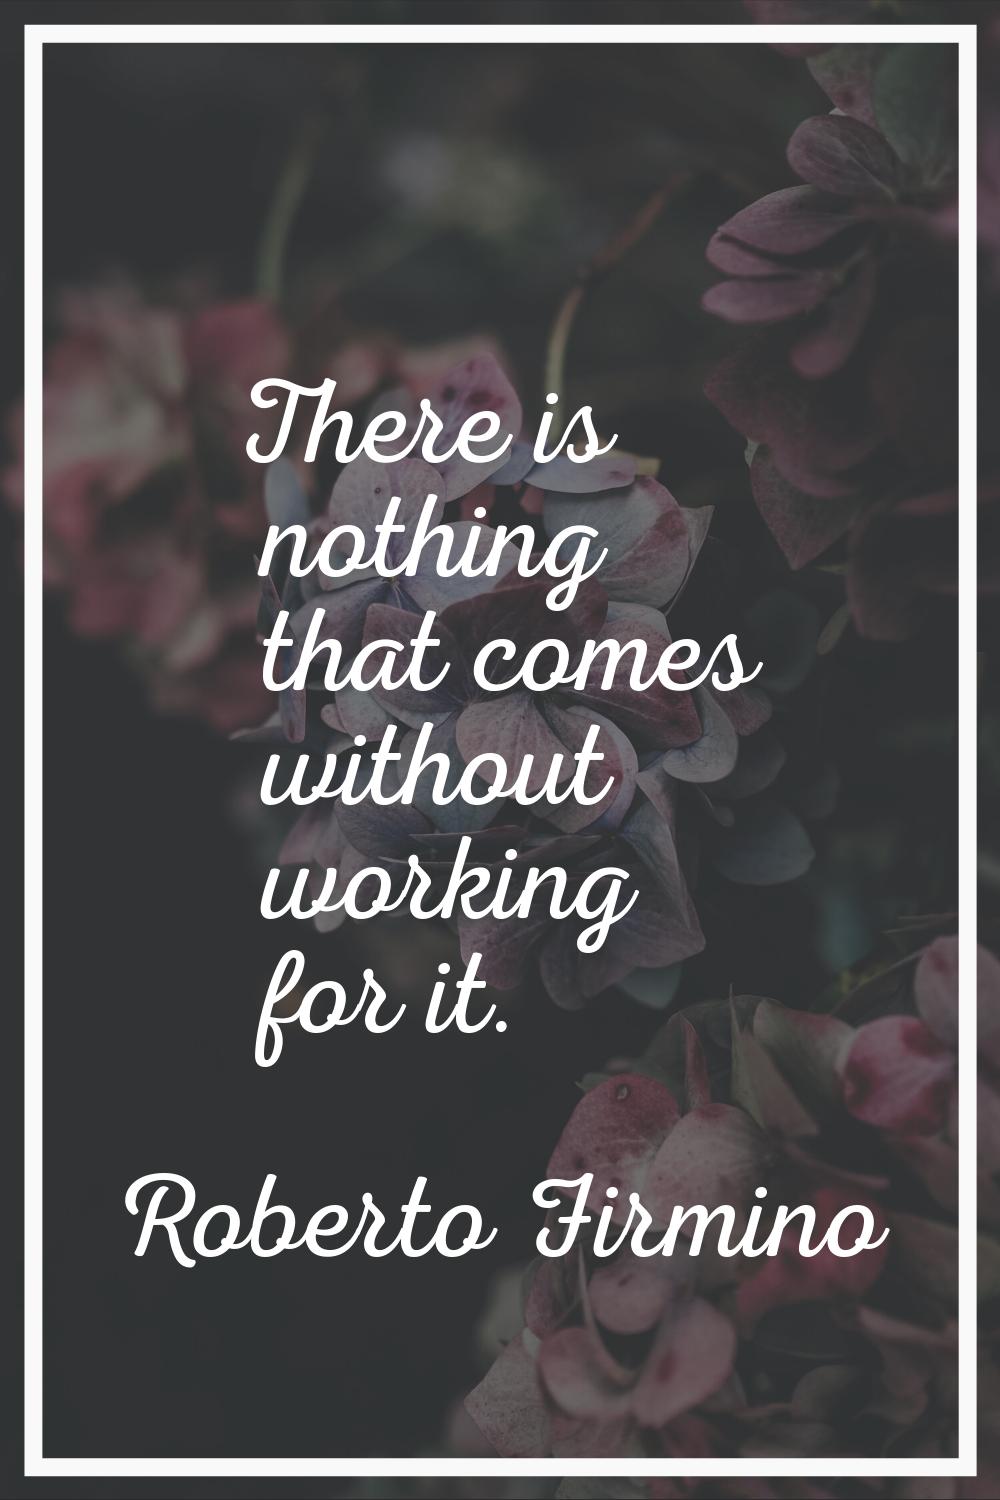 There is nothing that comes without working for it.